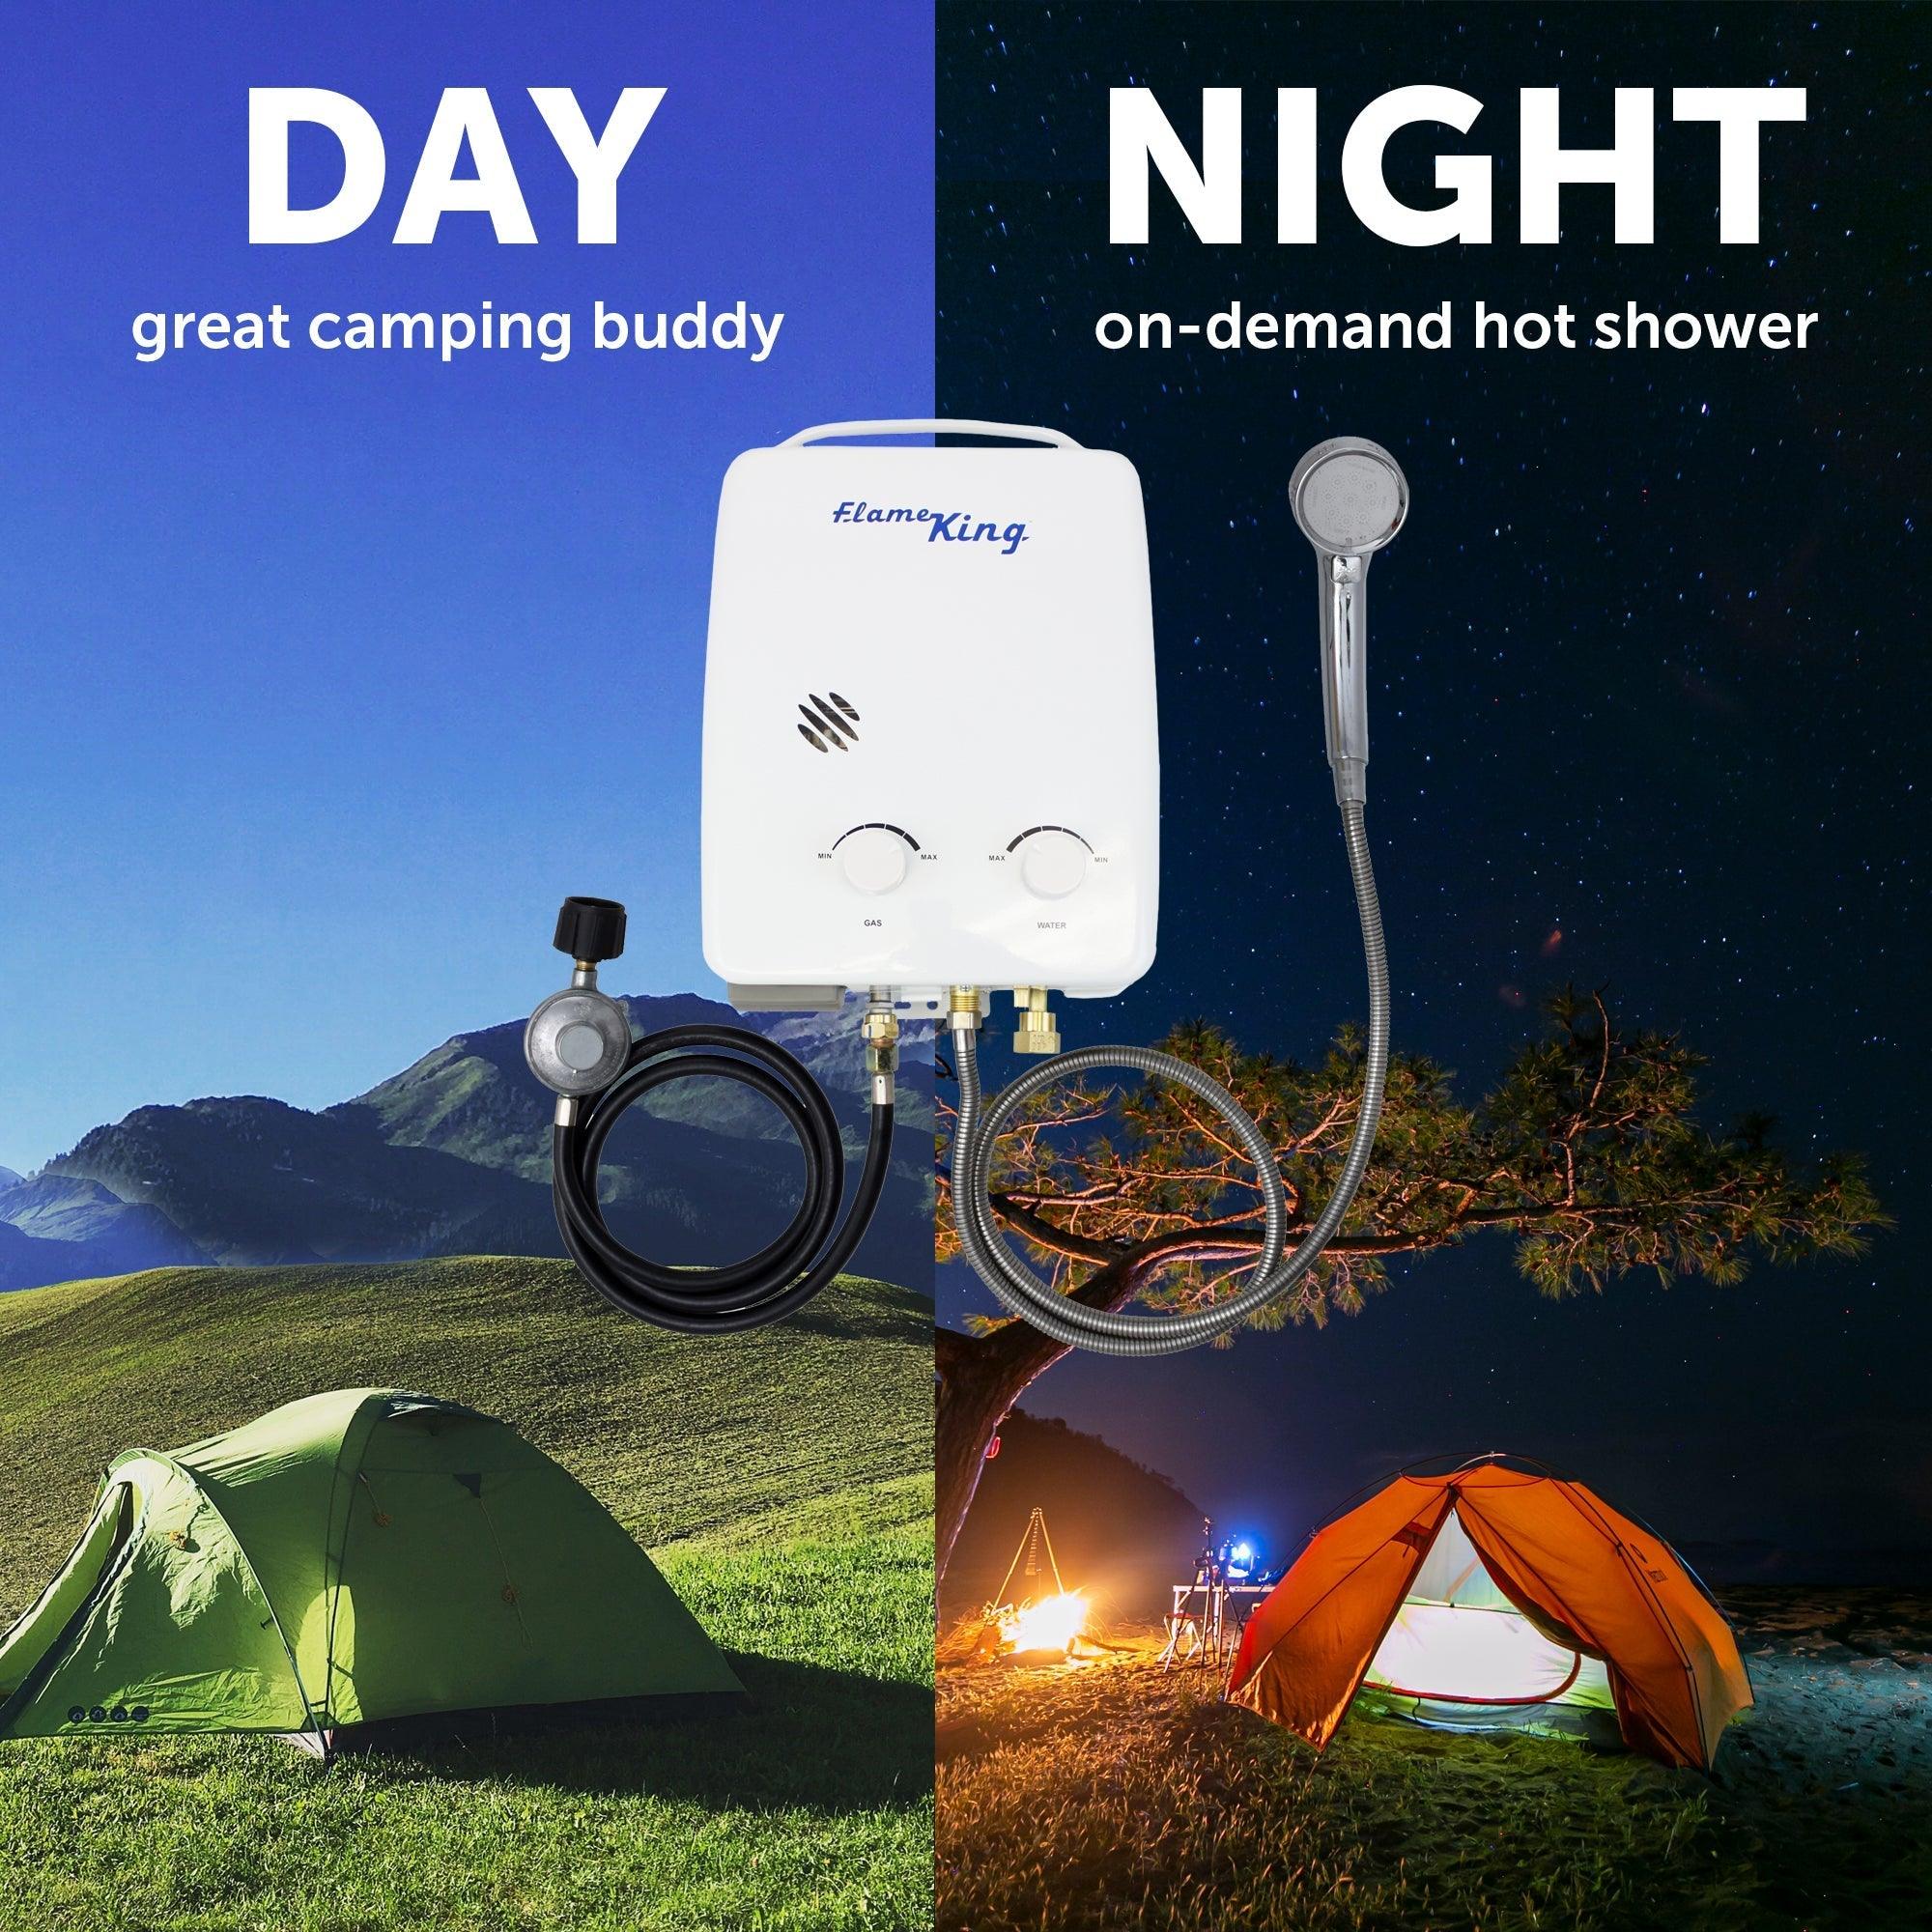 Flame King Tankless Outdoor Portable Shower Propane Gas 5L 1.32GPM Water Heater 34,000 BTU - Flame King